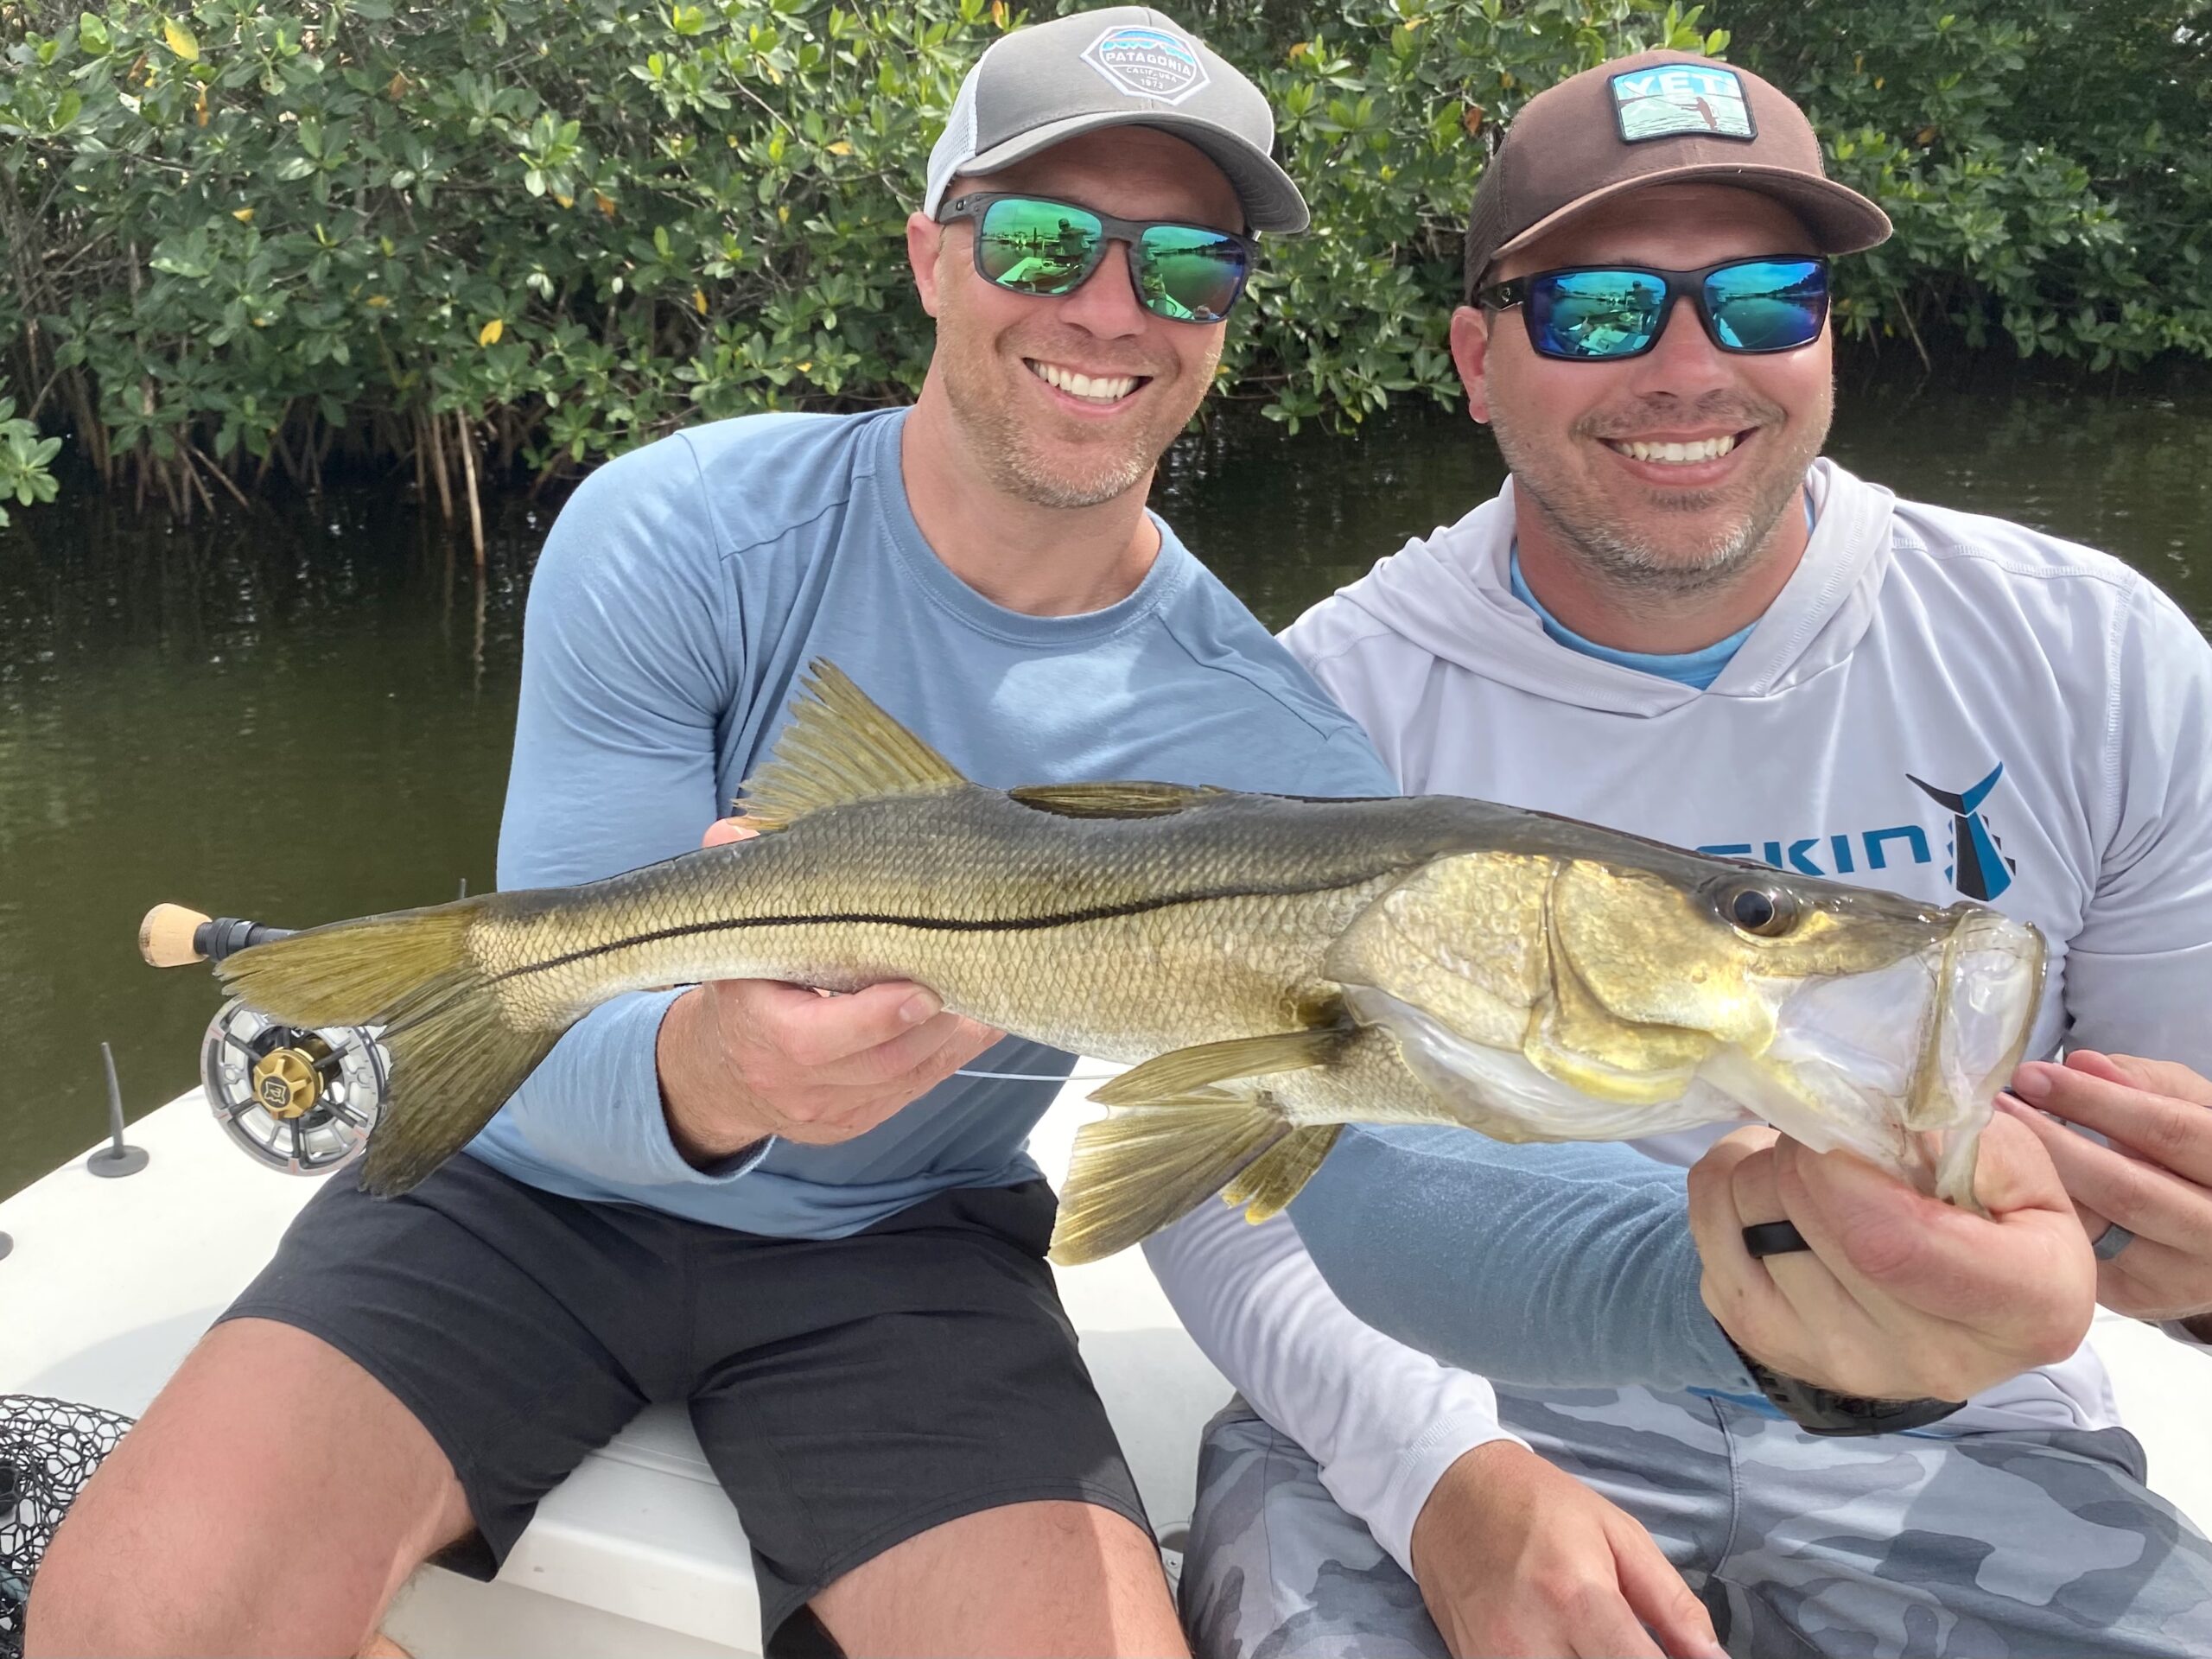 Two anglers hold up a snook they caught while on a fishing charter with Captain Brian Boehm